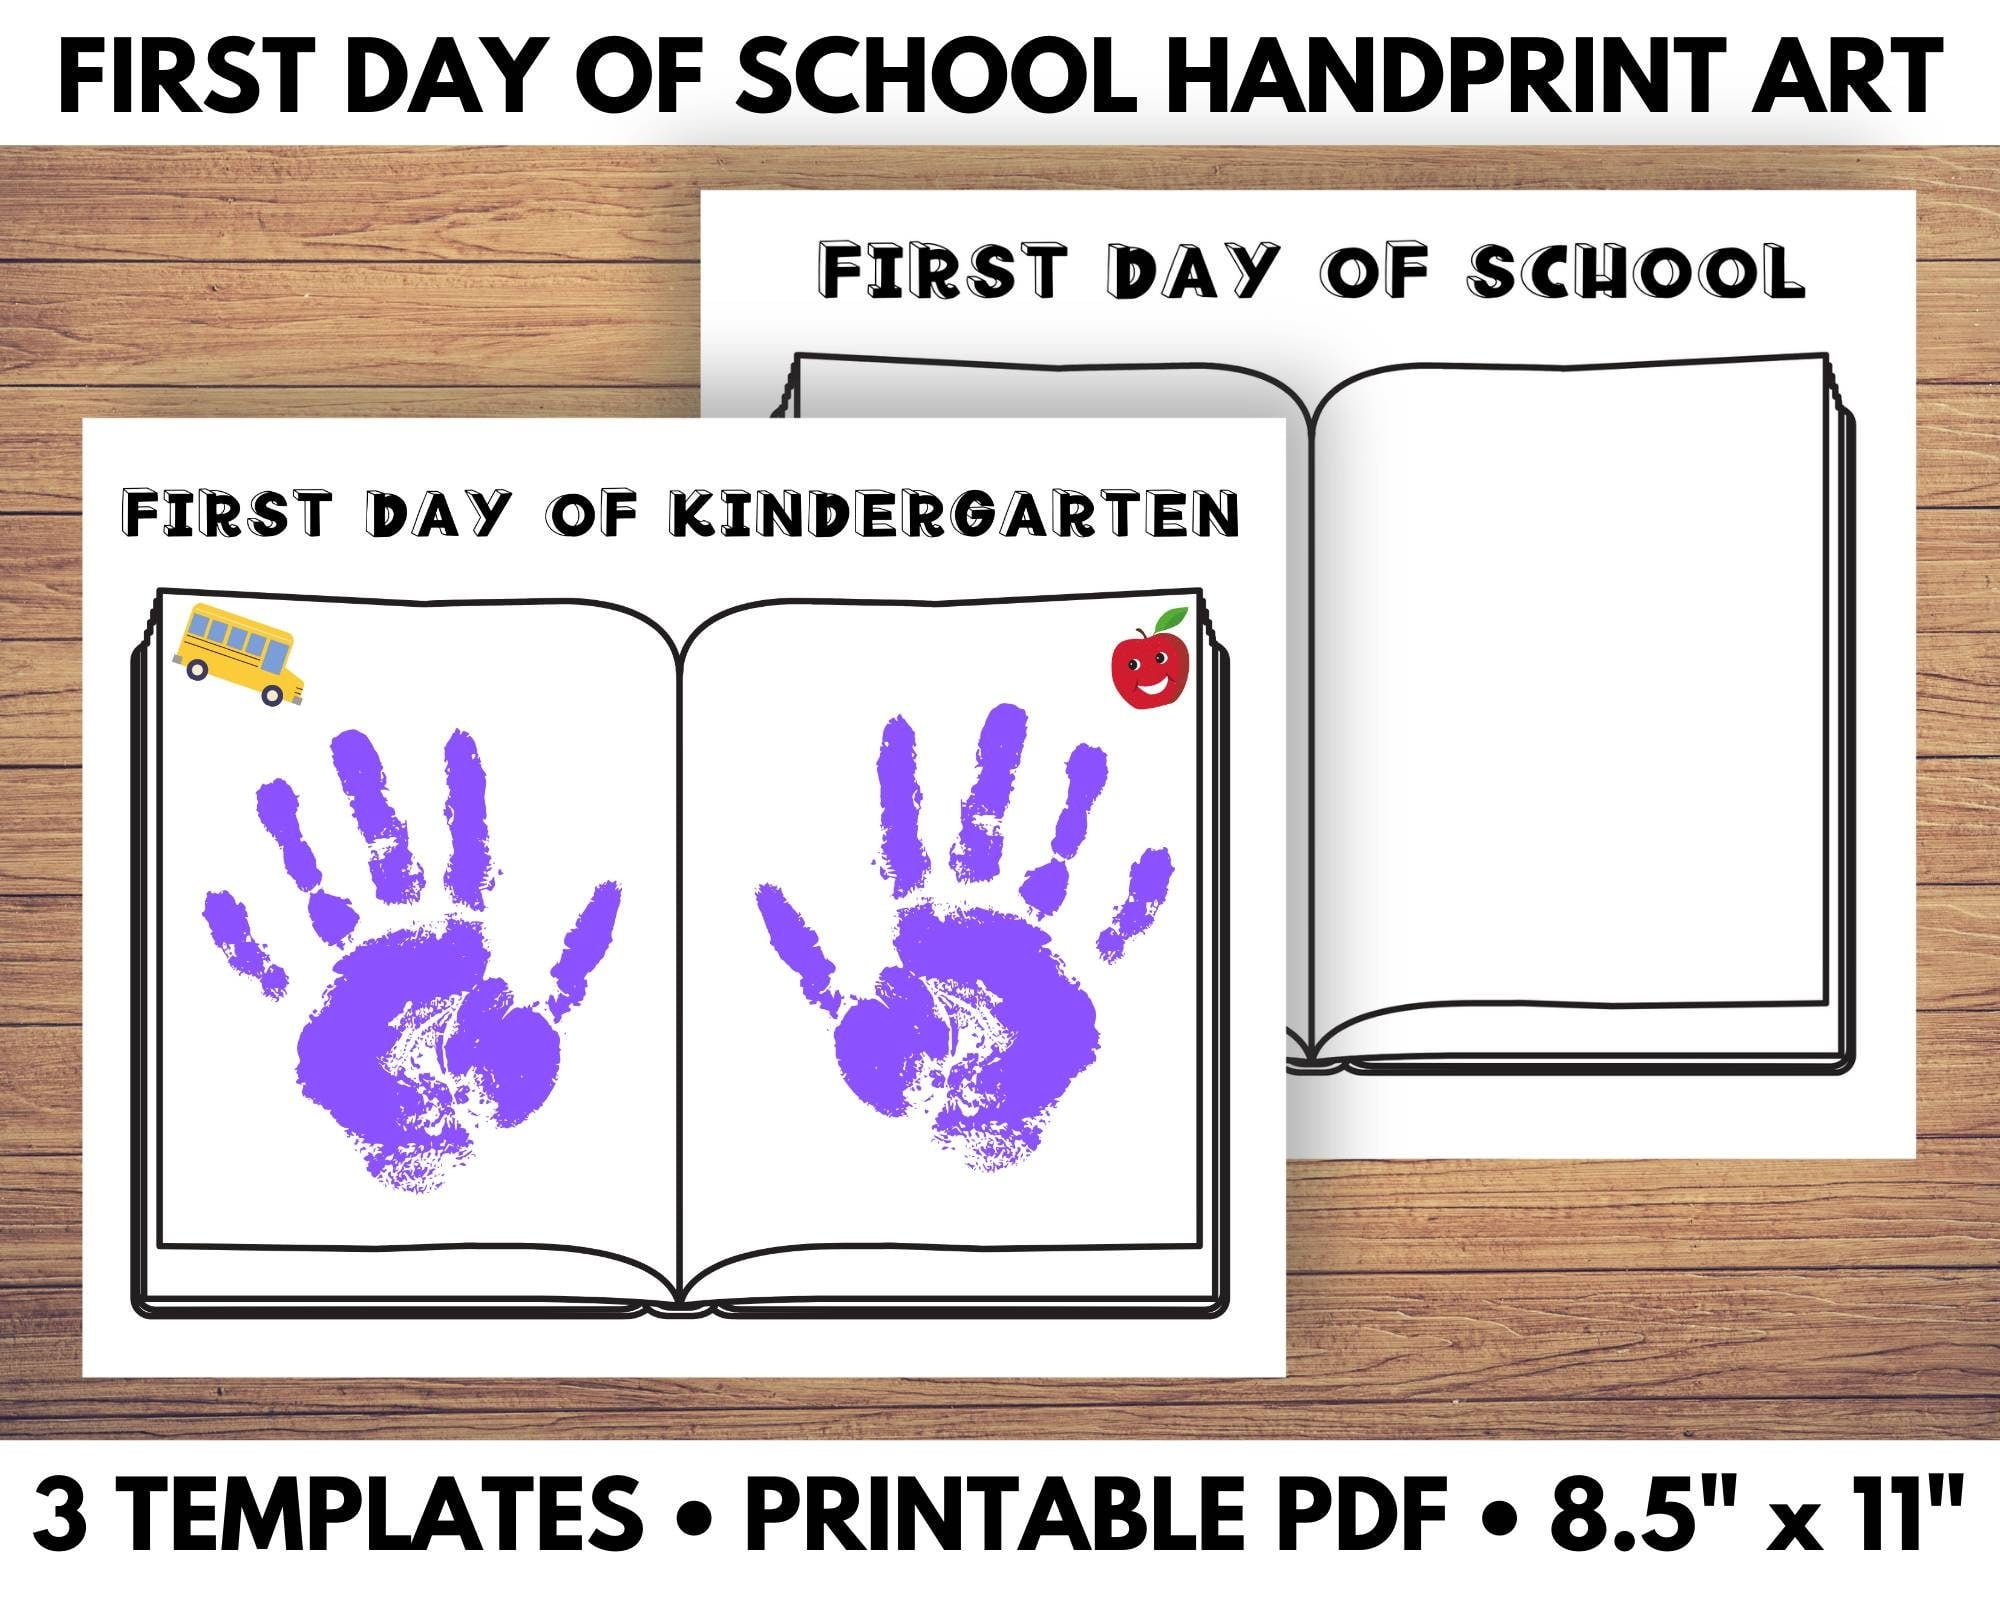 My First Day Handprint Free Printables